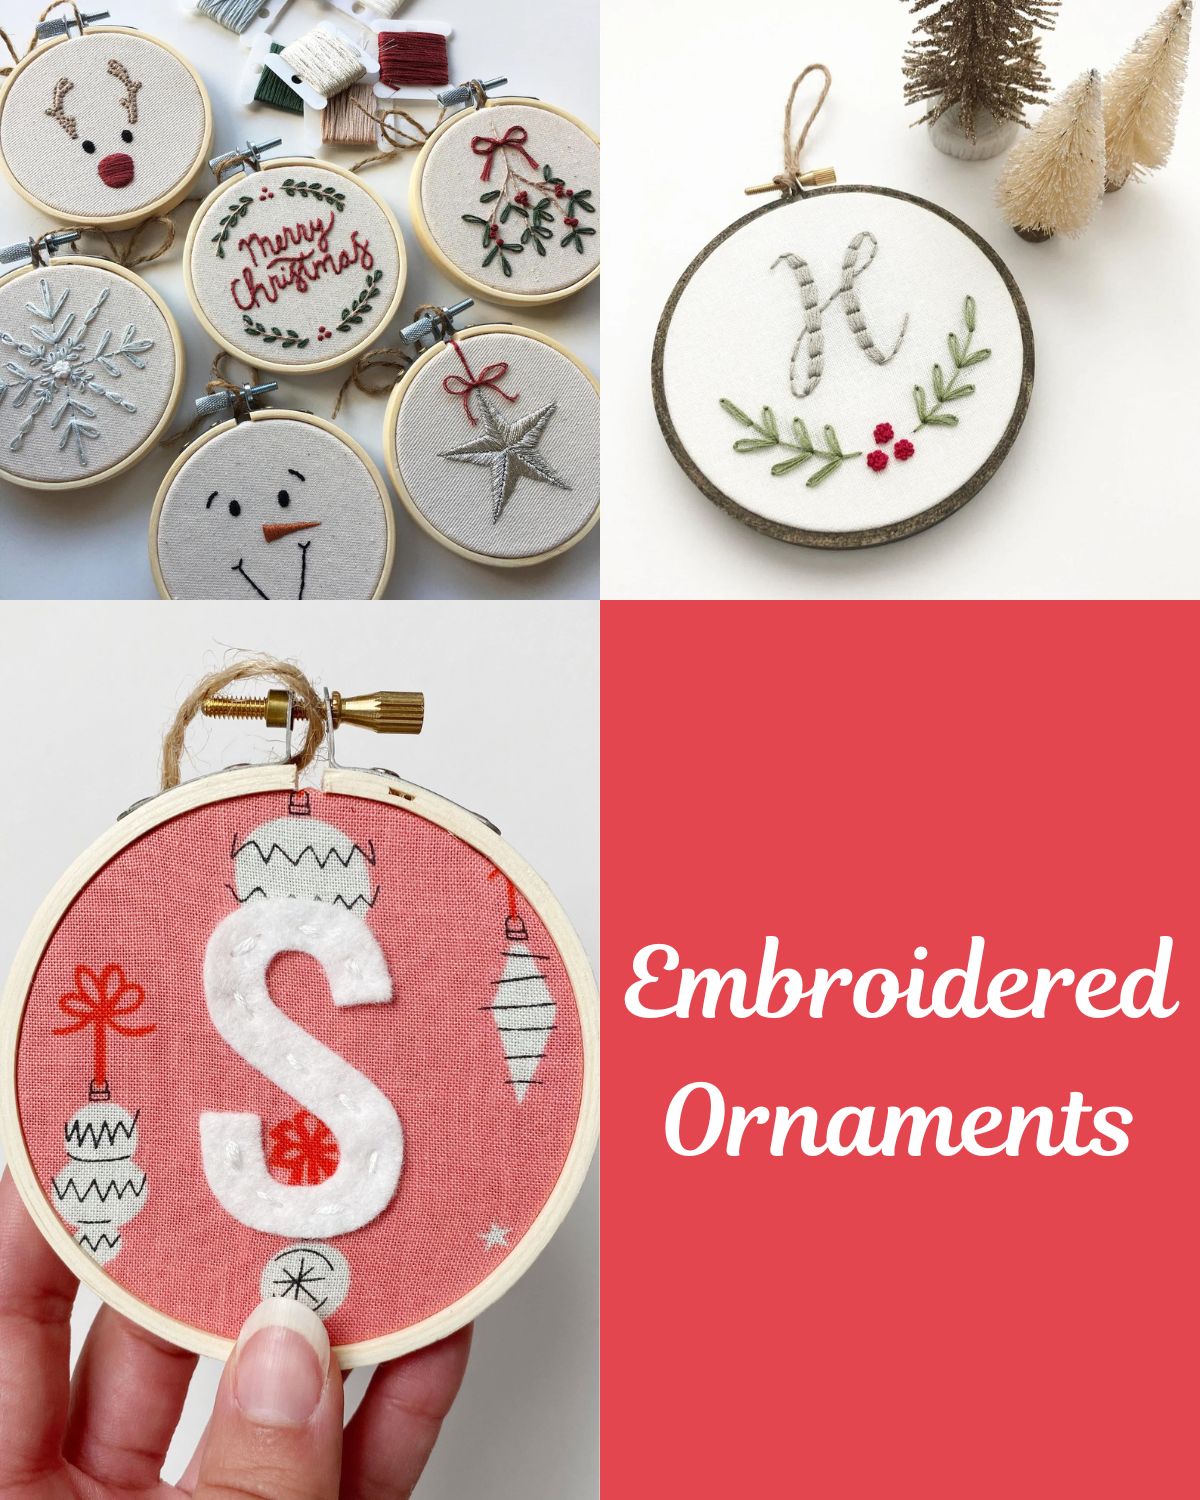 Embroidered ornaments